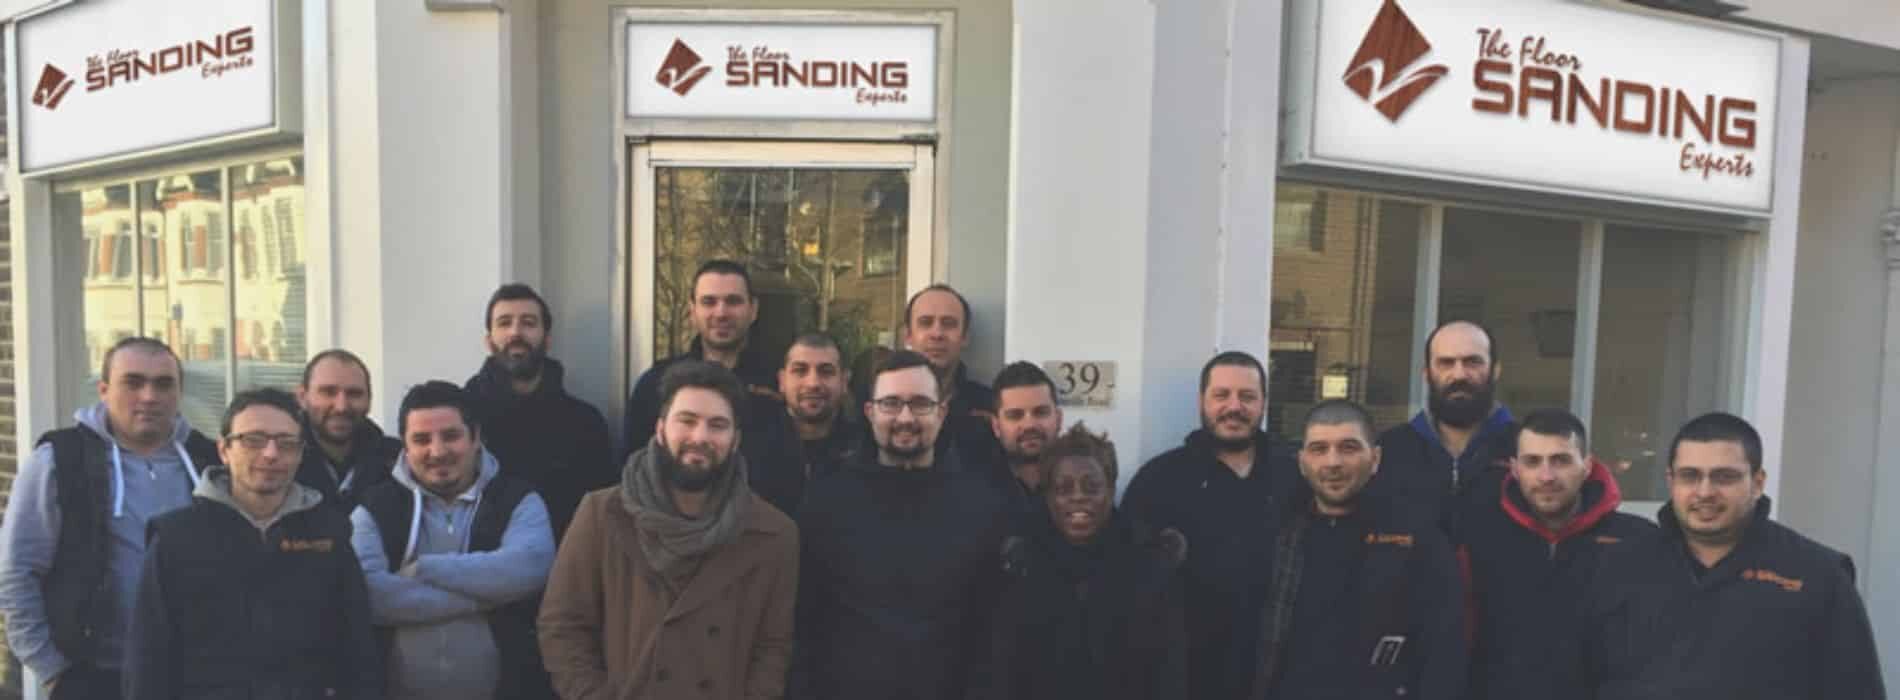 Mr Sander® team in Bexleyheath, DA6: Our skilled professionals are ready to transform your floors. With years of experience and dedication, we provide top-quality services. Step into our office and witness the excellence that awaits you.